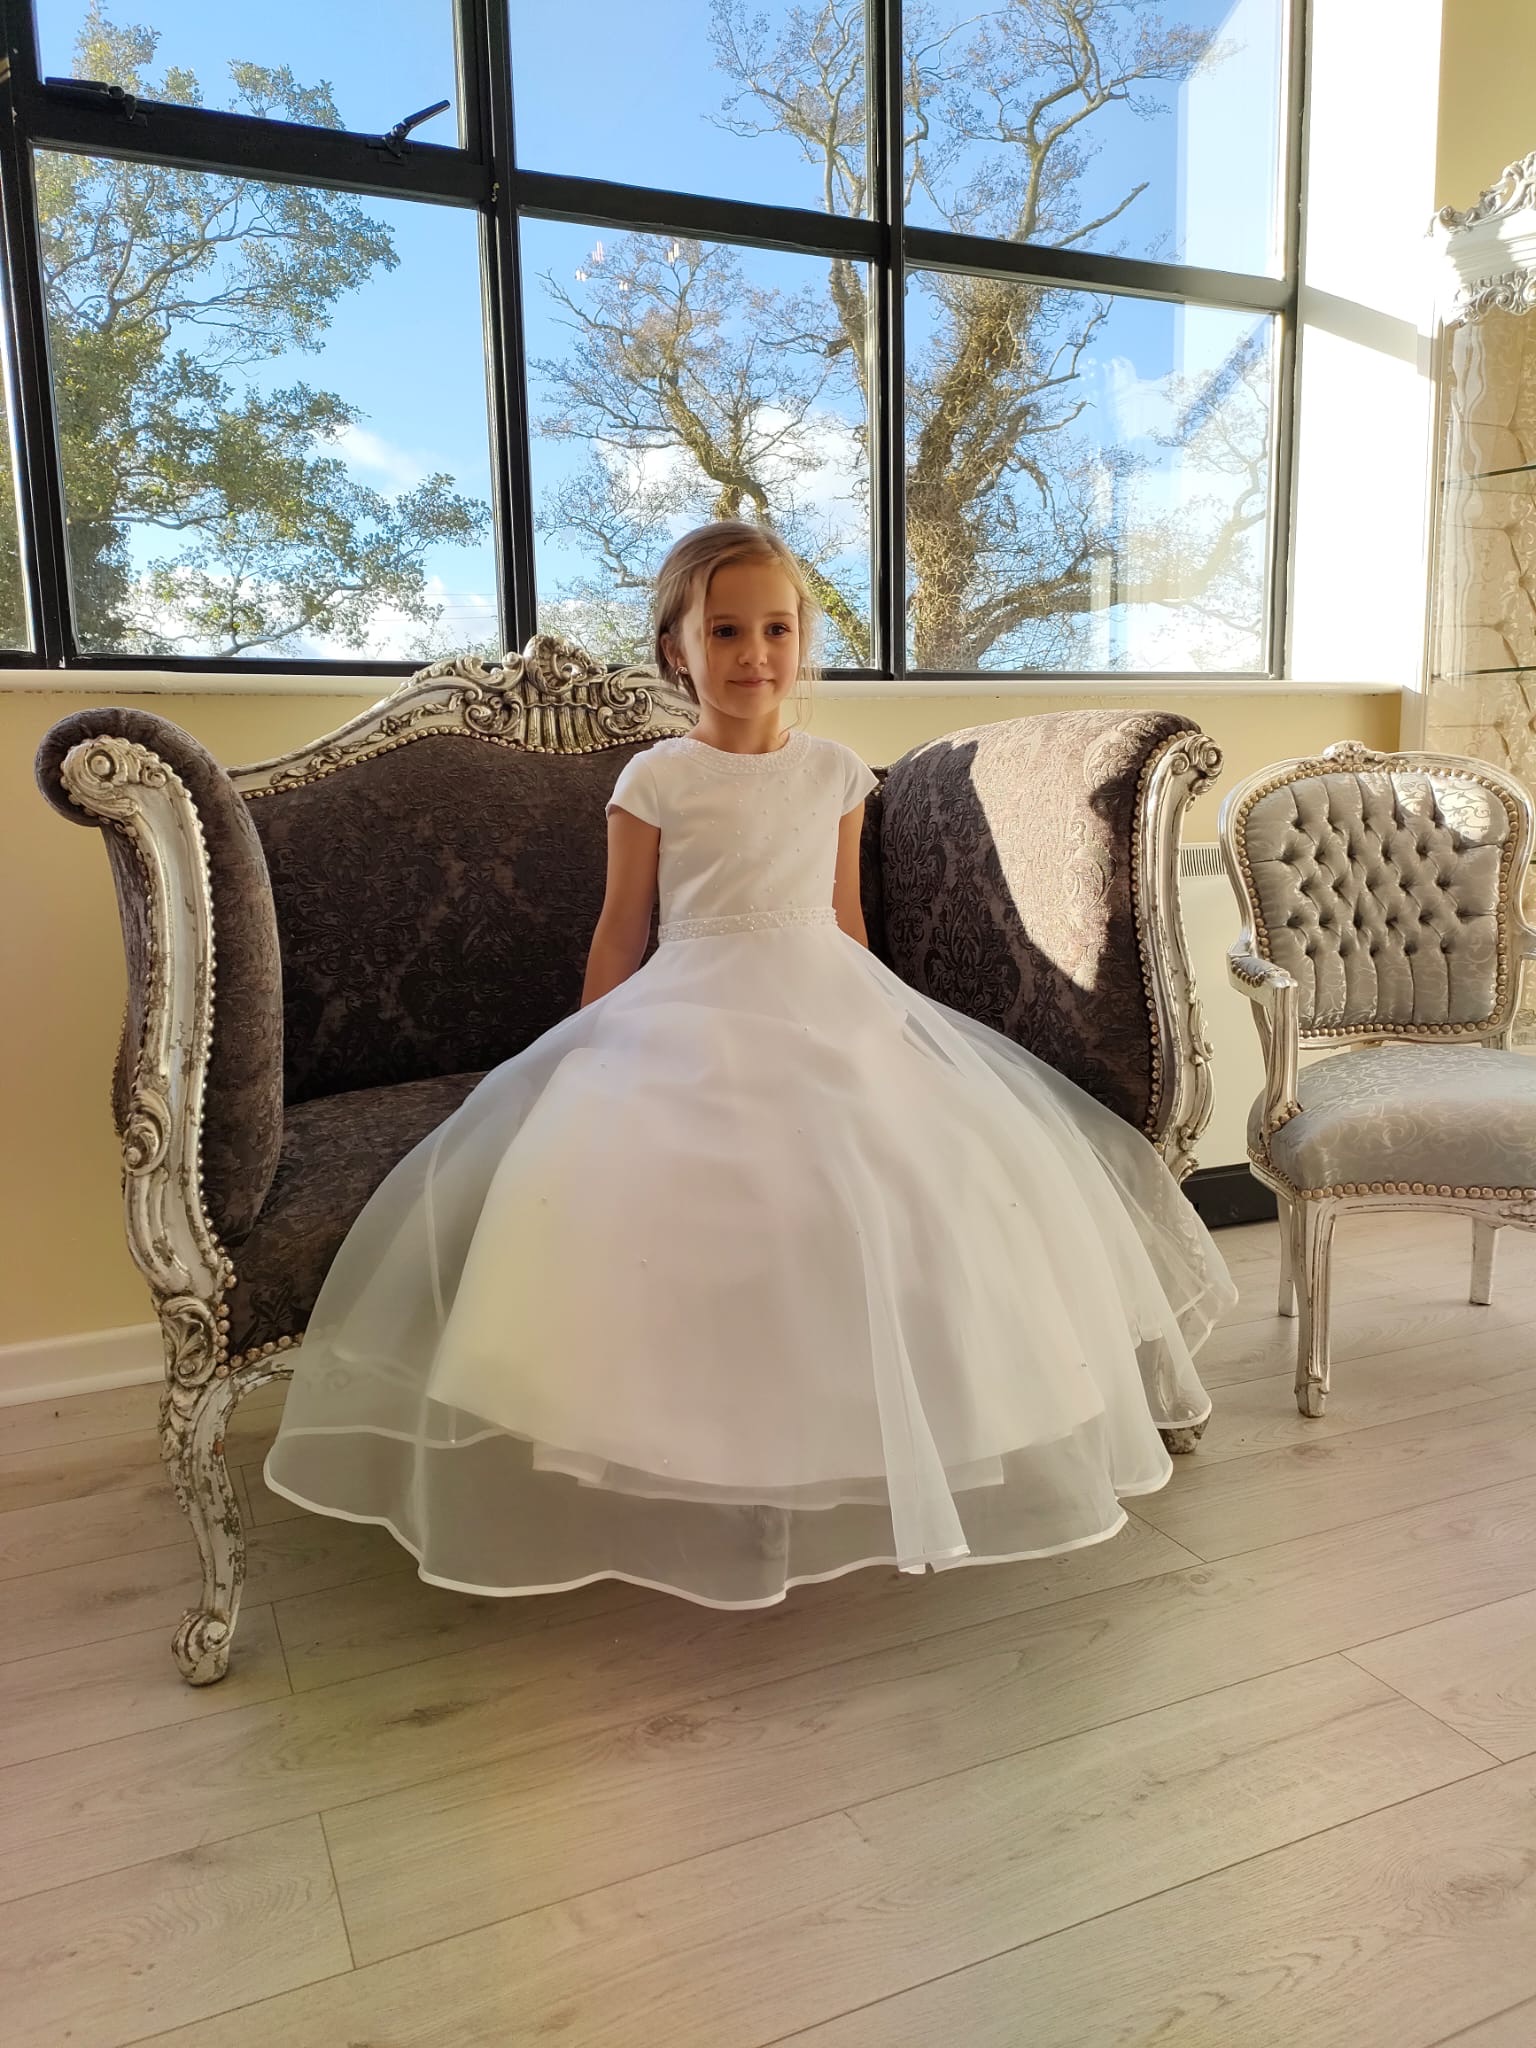 Cap sleeved Communion dress with pearl detail organza skirt